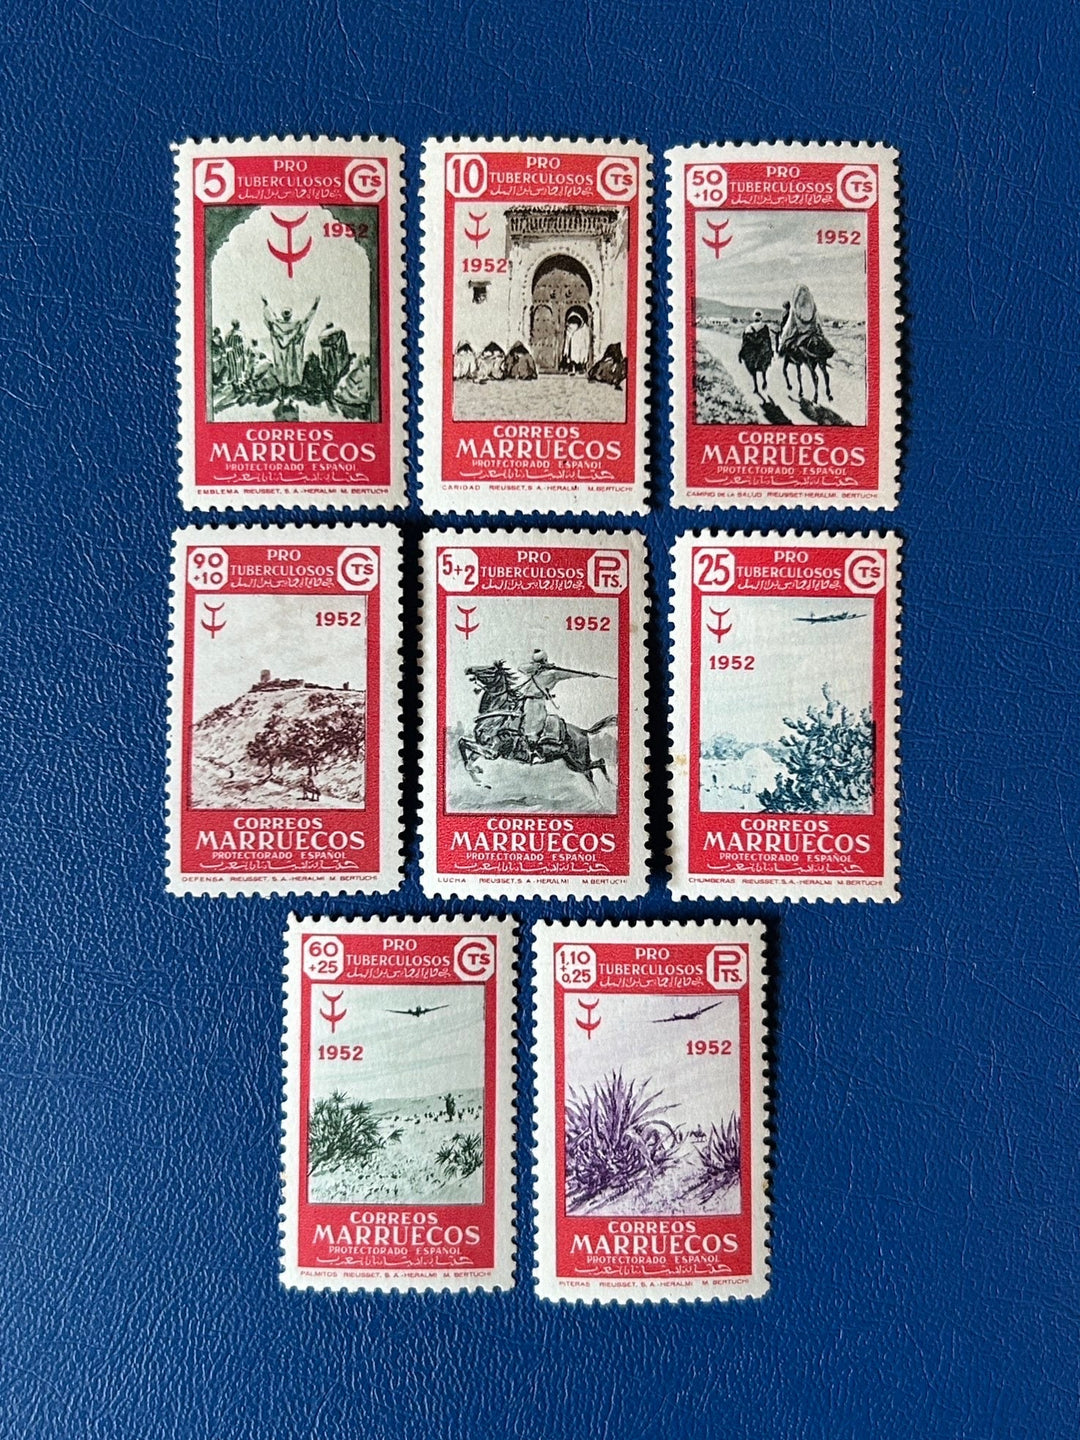 Sp. Morocco - Original Vintage Postage Stamps- 1952 - Anti Tuberculosis - for the collector or crafter